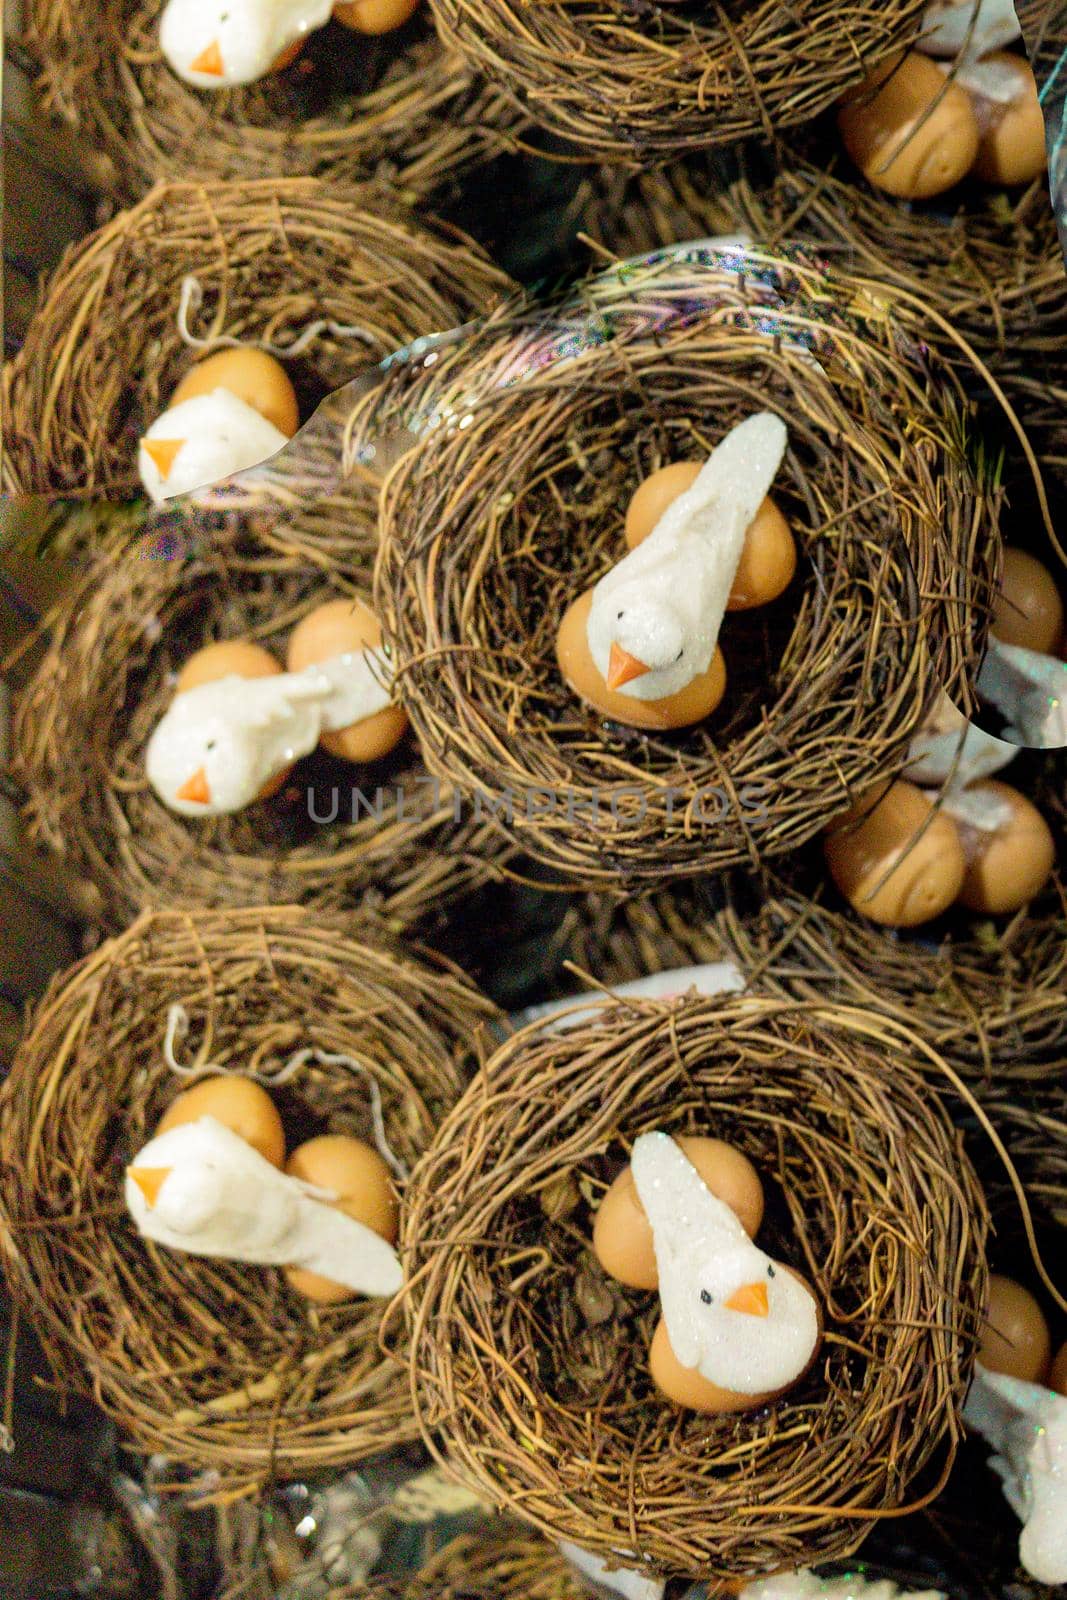 The small artificial bird nest with fake eggs in it by berkay